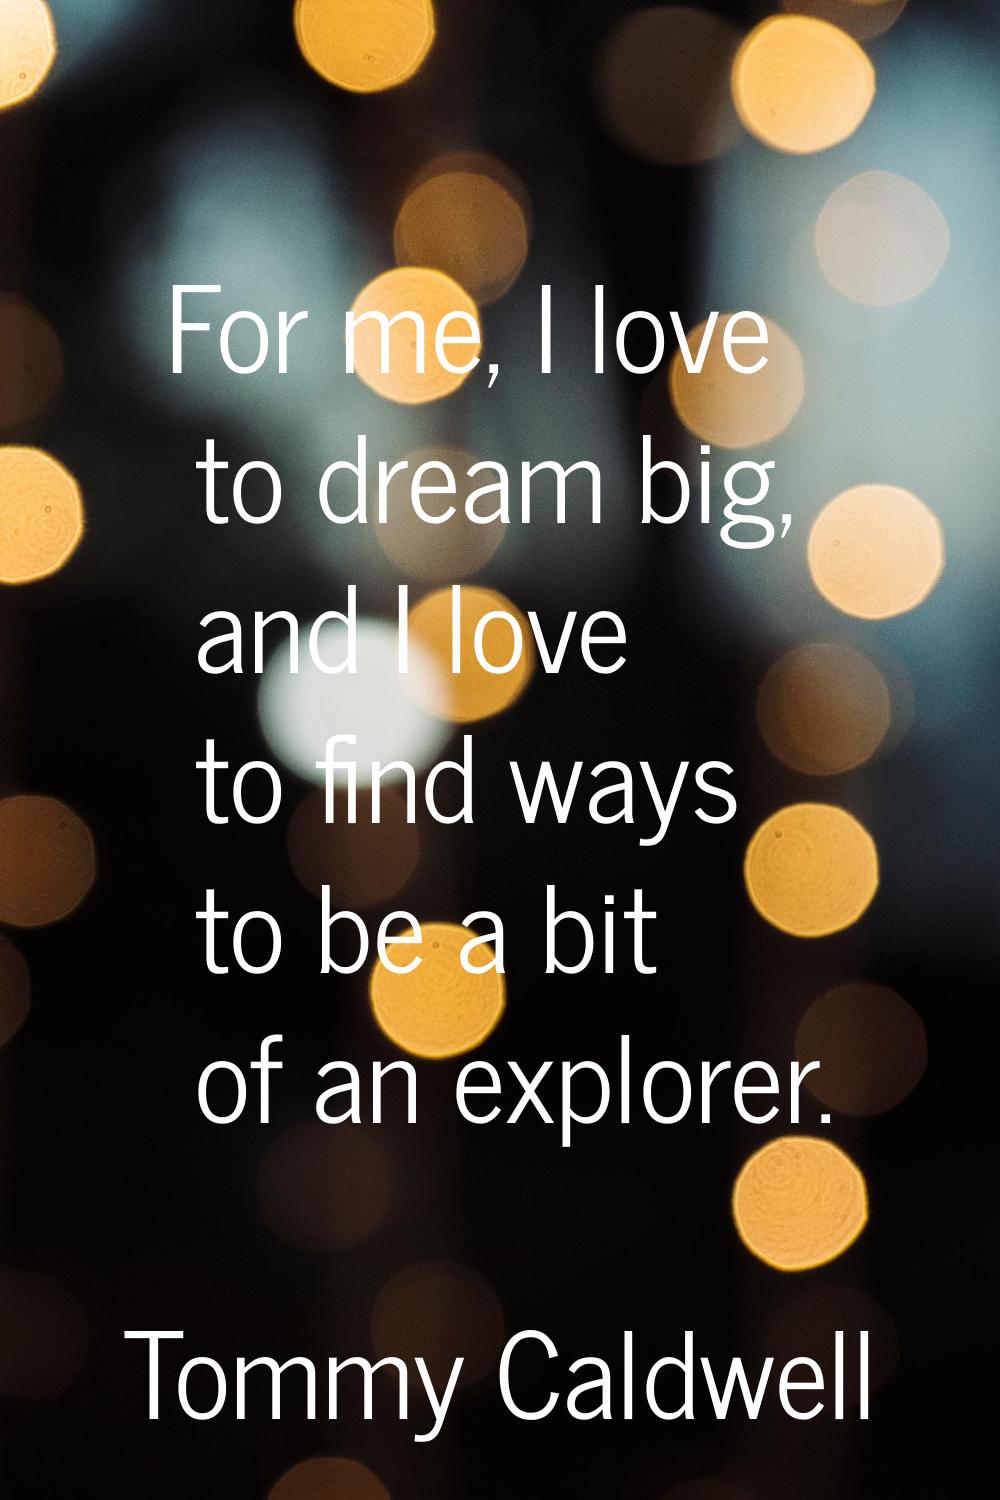 For me, I love to dream big, and I love to find ways to be a bit of an explorer.